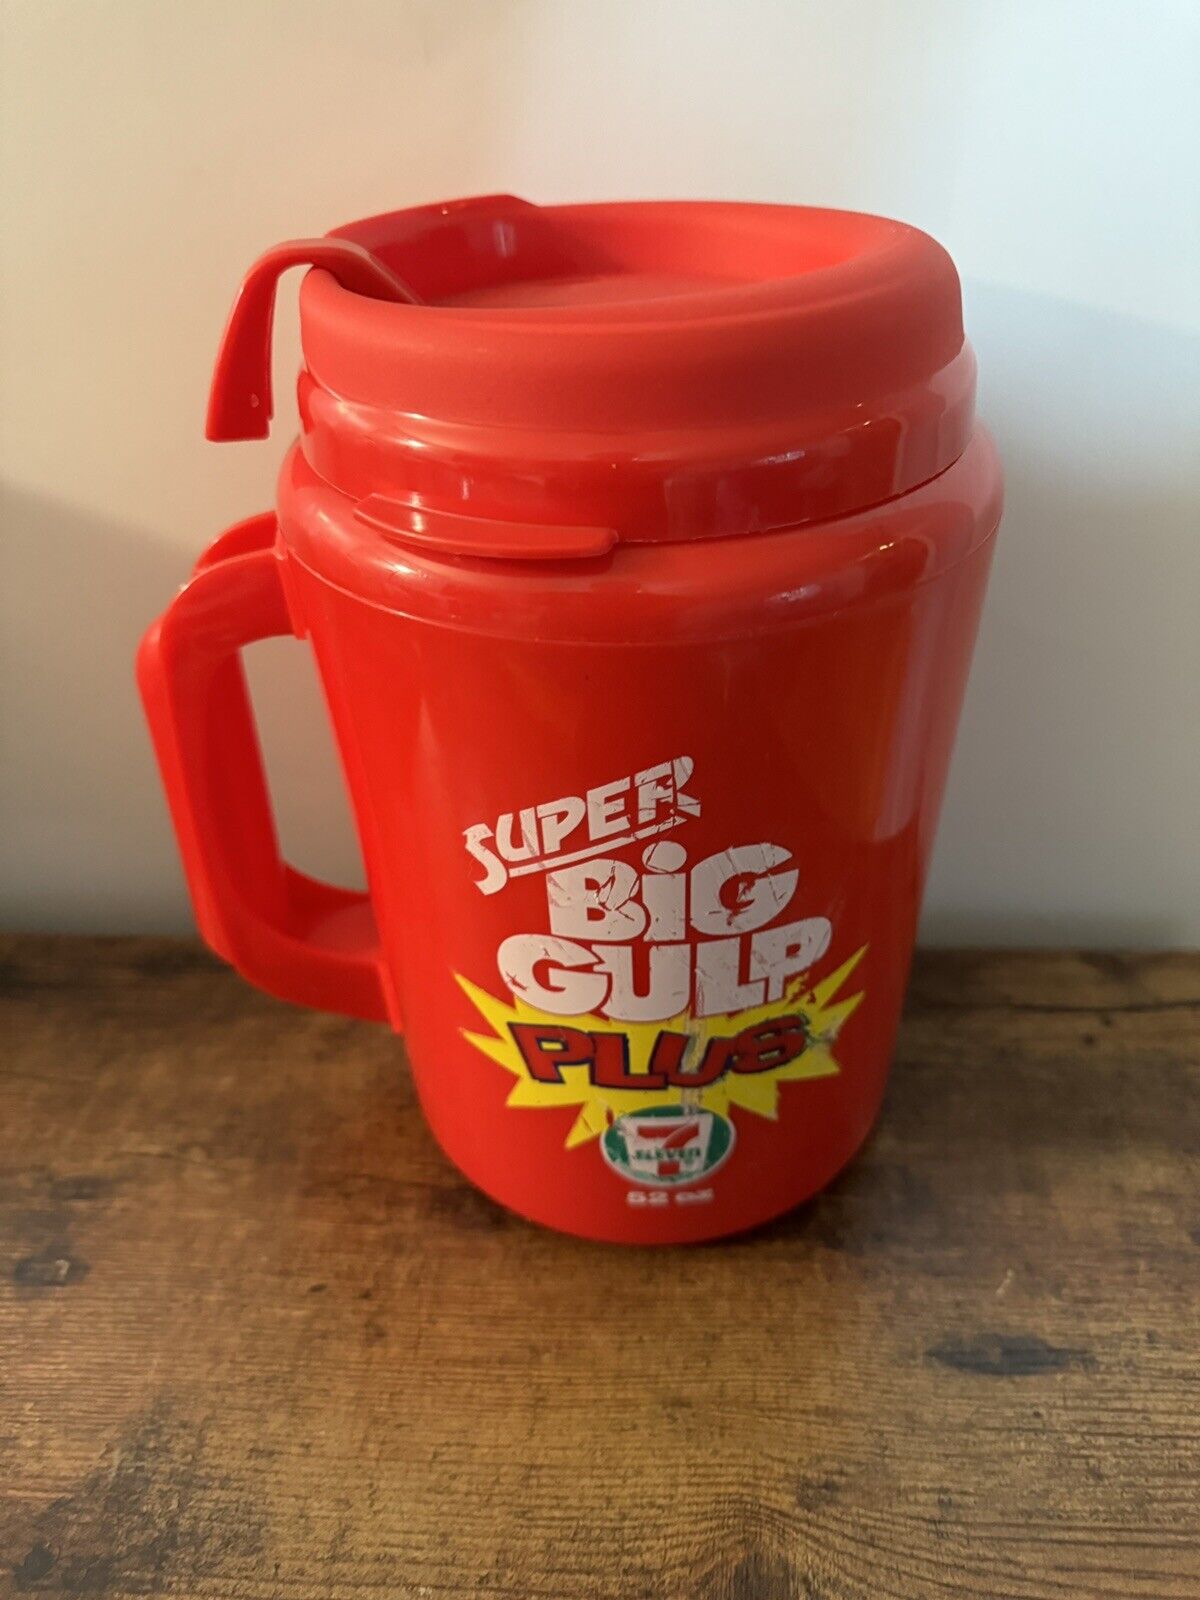 7 Eleven X-treme Gulp Mug Super Insulated Travel52 Oz Large Red Cup Extreme